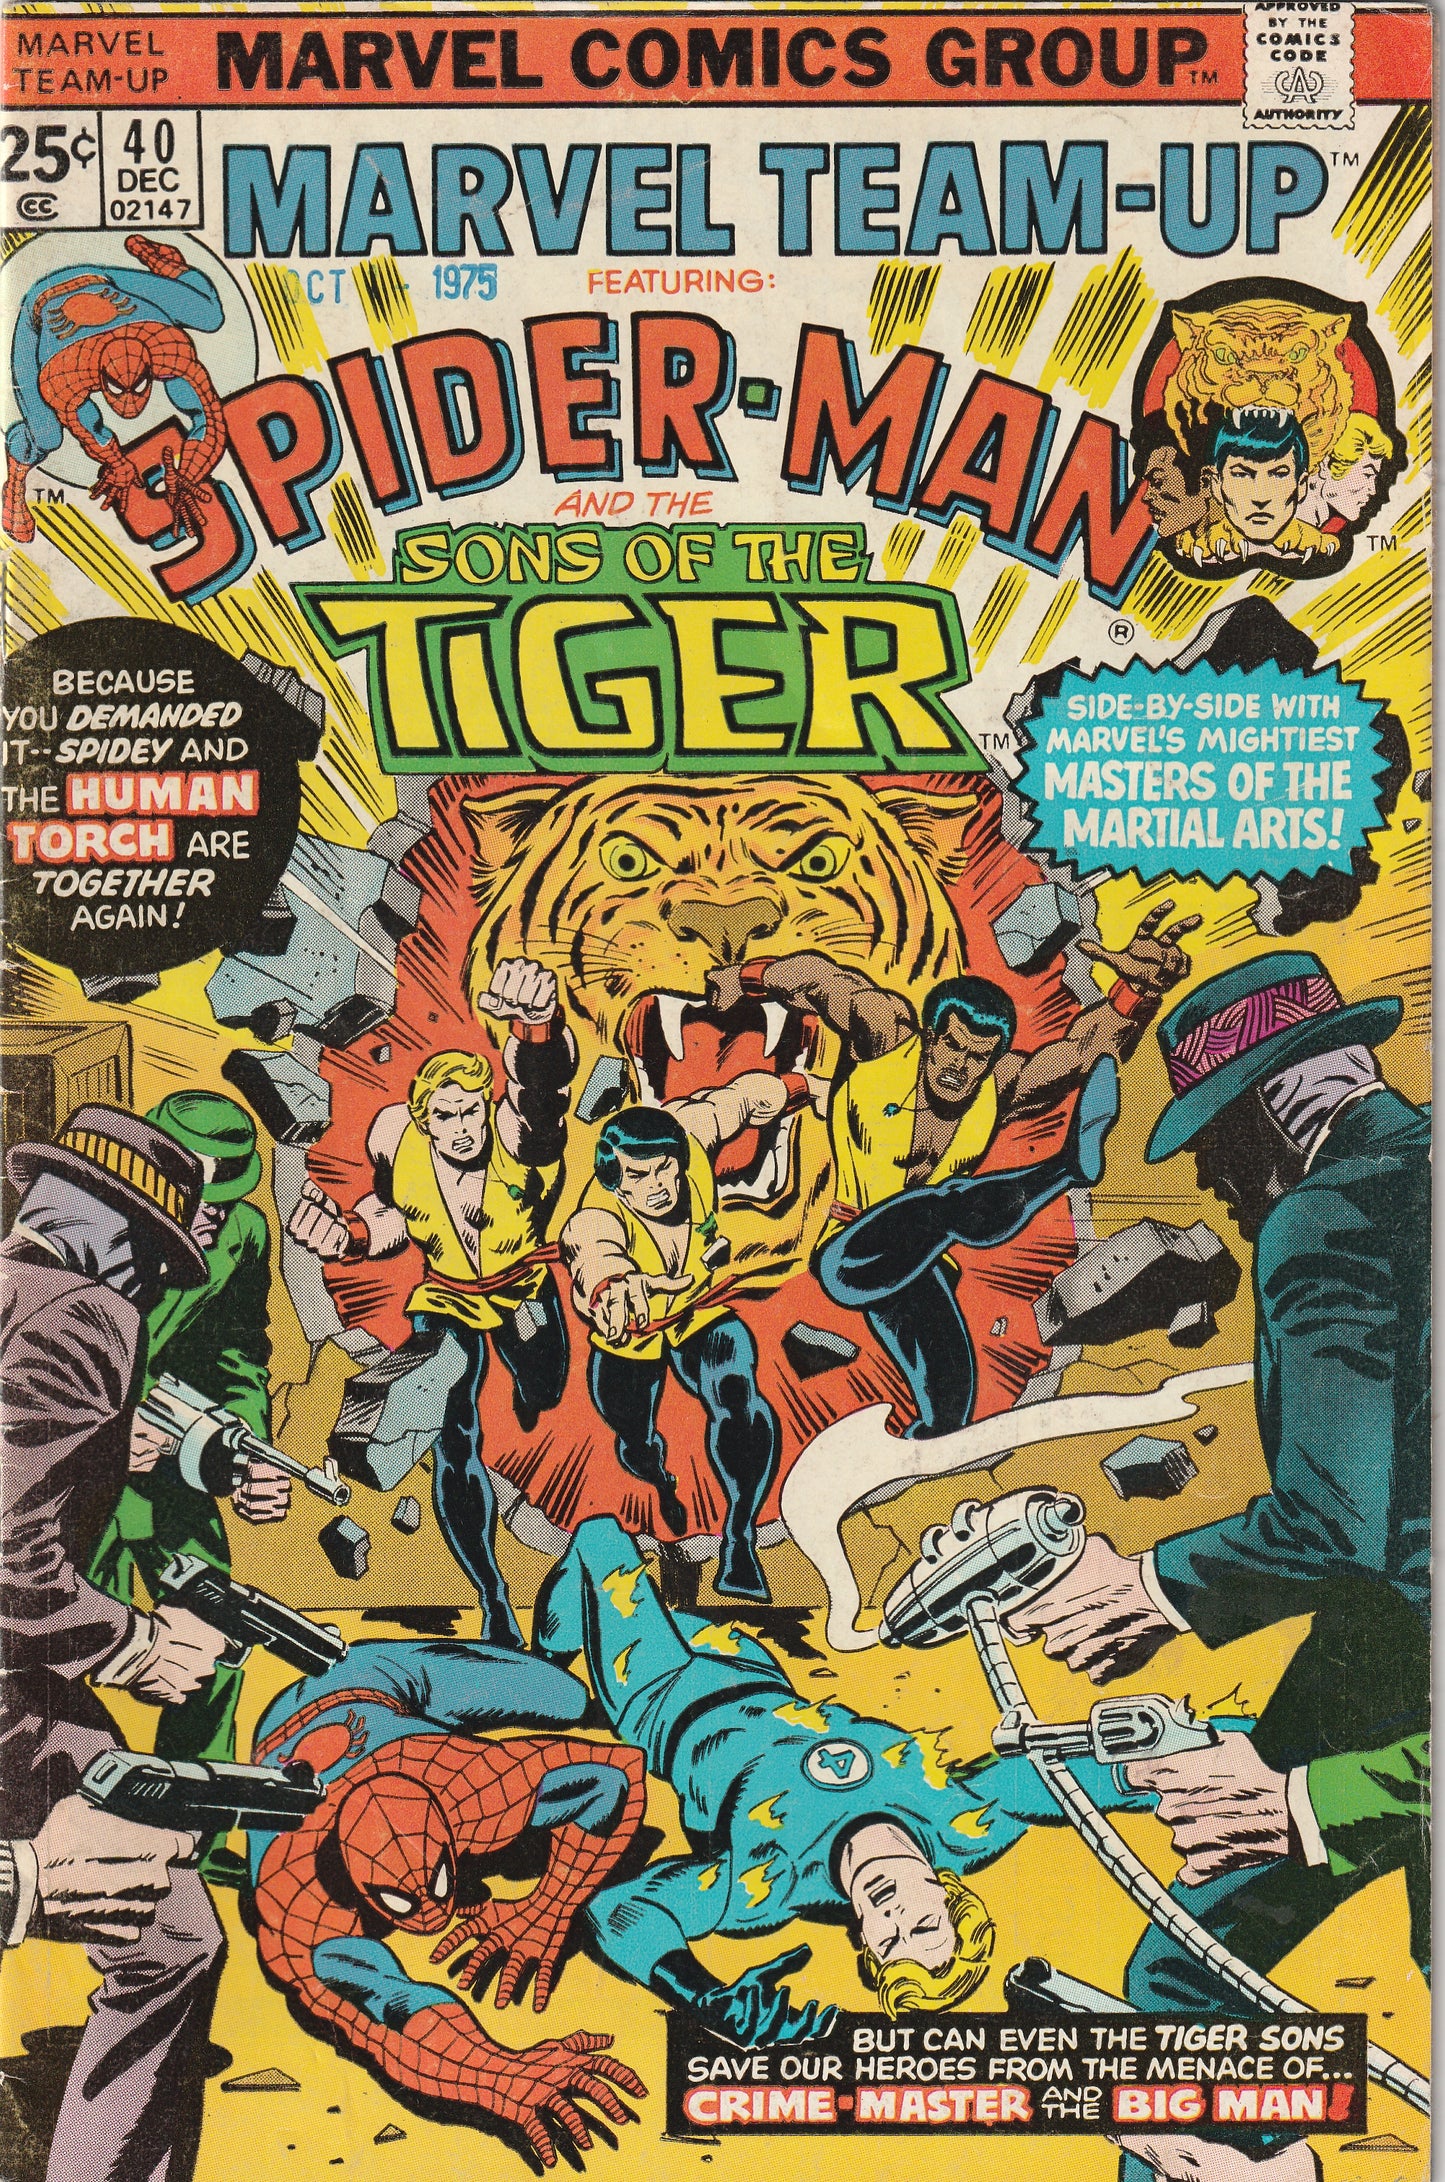 Marvel Team-Up #40 (1975) - Spider-Man & Sons of the Tiger - Human Torch appearance